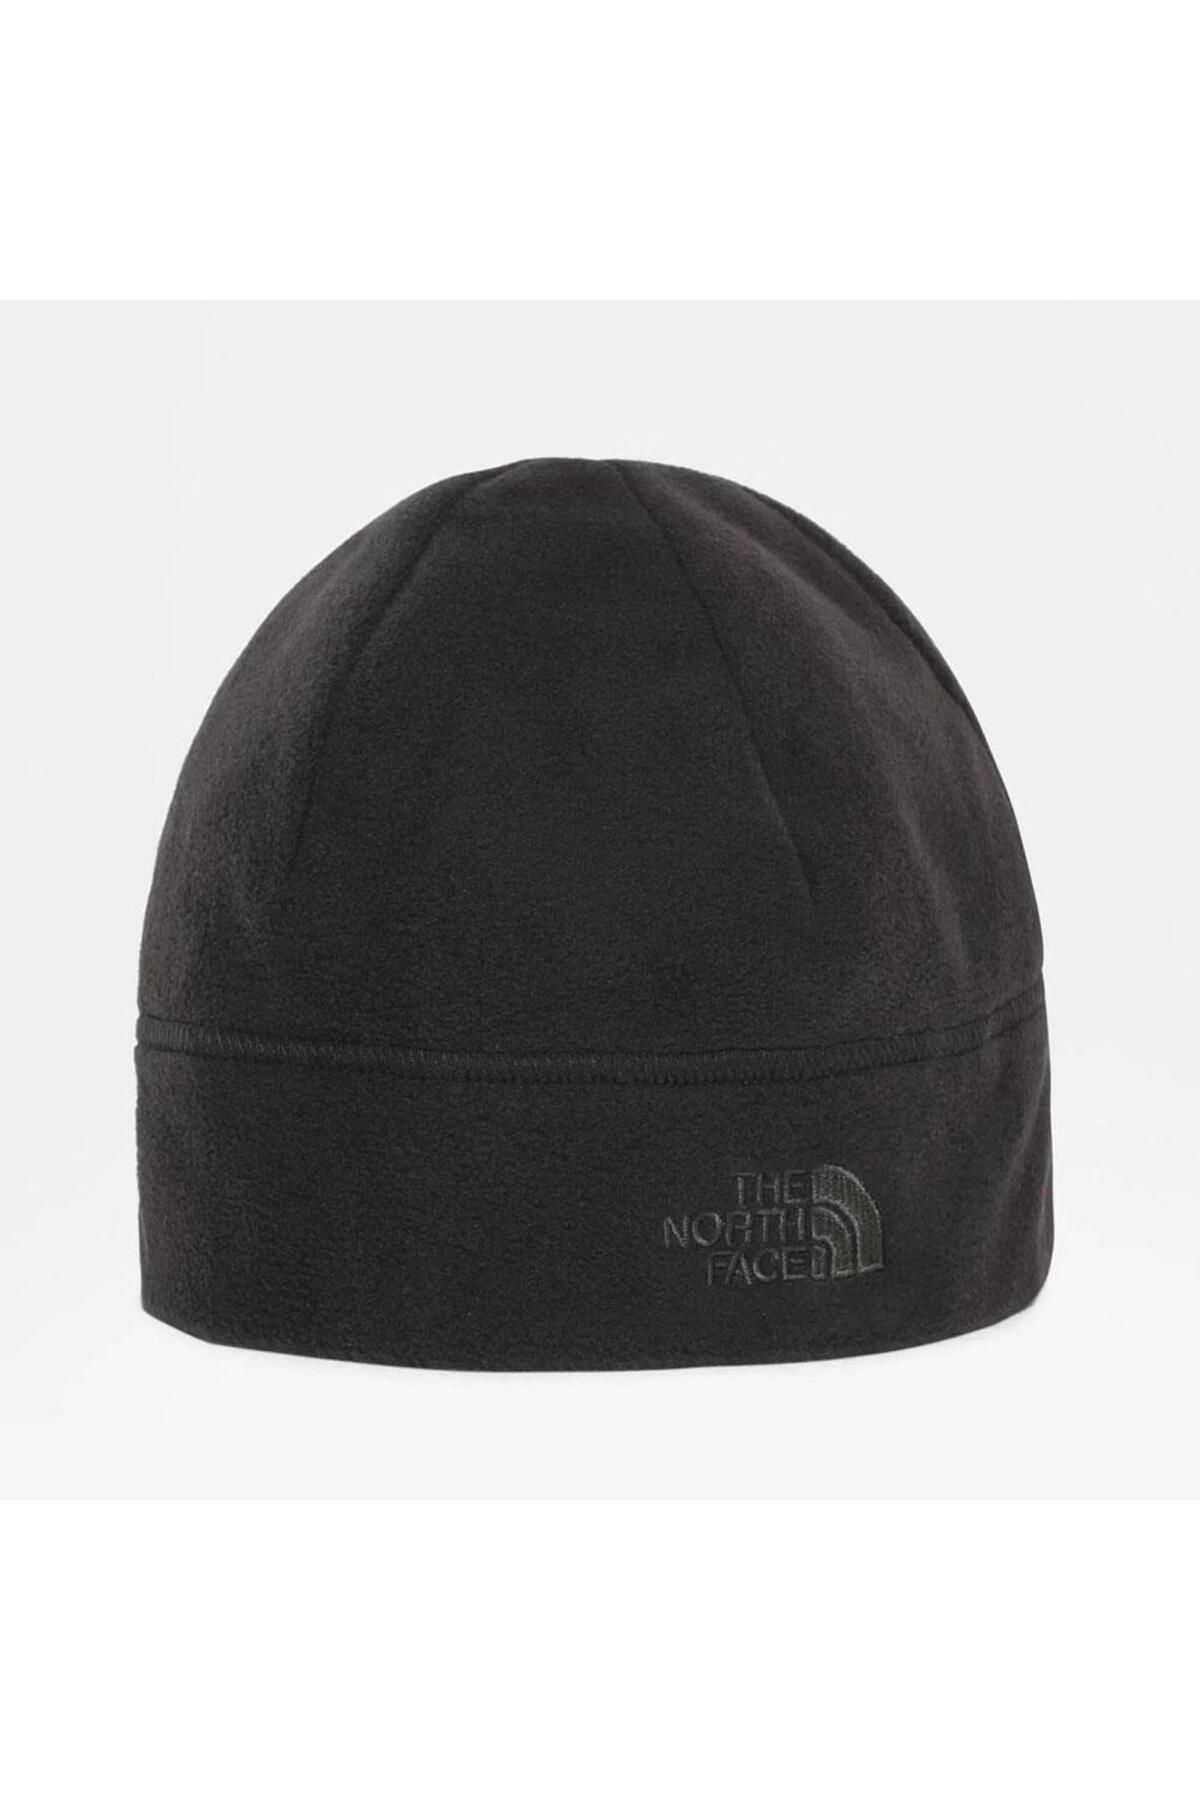 The North Face Tnf Standard Issue Beanie Unisex Bere Nf0a3fı7kt01